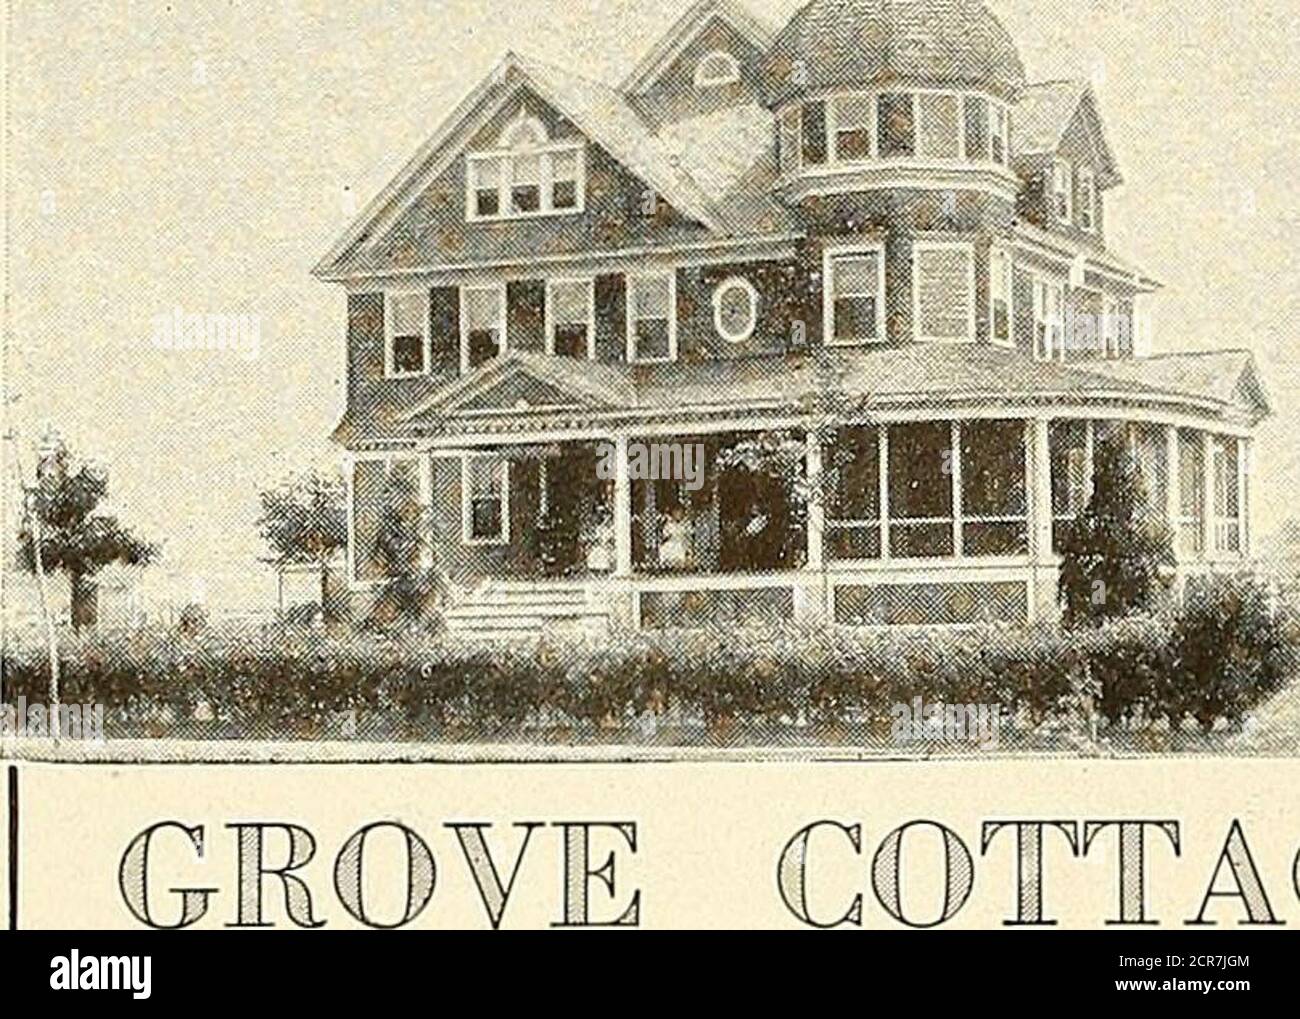 . Long Island and real life, Long Island railroad . Av 5-Mile Look ery s D-iviiic RESTAURANT AND CAFE C . H . M U R D O C K . II a n a ji e r SHORE DINNERS A FEATUREALL KINDS OF SHELL FISH A LA CARTE ONLY BOATING AND BATHINGBlue Point, Long Island, on the shore TELEPHONE 76 Music a u d D a ii c i u &lt;. VE COTTAGE 5OUTH GMOVE STREETEPOET, Lo lo. No Yo Attractive and homelike, accommodating 30guests; situated on Sportsmens Cliannel, infull view of water; but three minutes walkfrom Bay; boating, bathing, fishing; motorand row boats—boat anchorage. Shadedgrounds, croquet, tennis, electric light Stock Photo